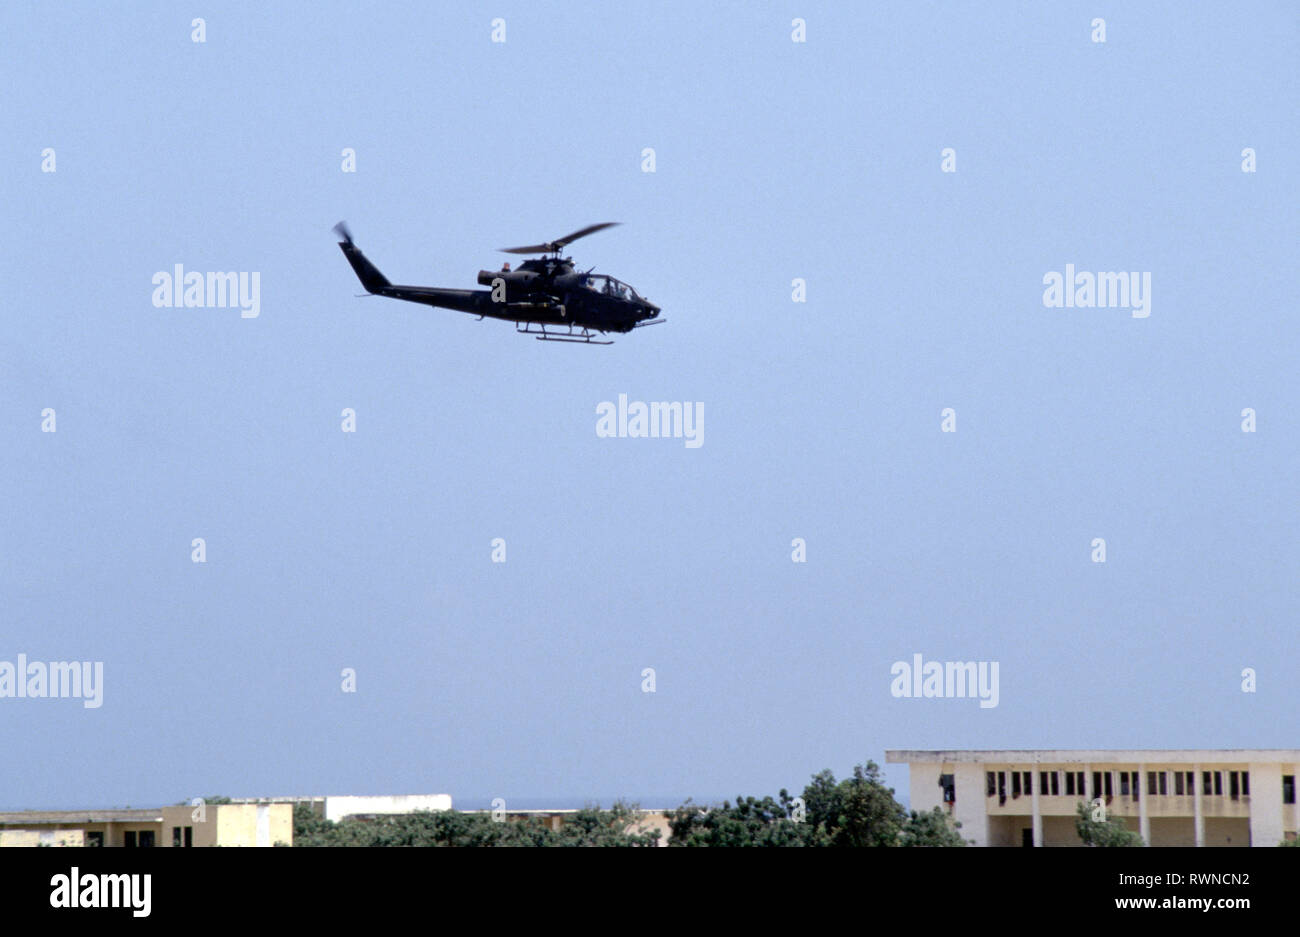 20th October 1993 A U.S. Army Bell AH-1 Cobra attack helicopter patrols low above the rooftops of Mogadishu, Somalia. Stock Photo